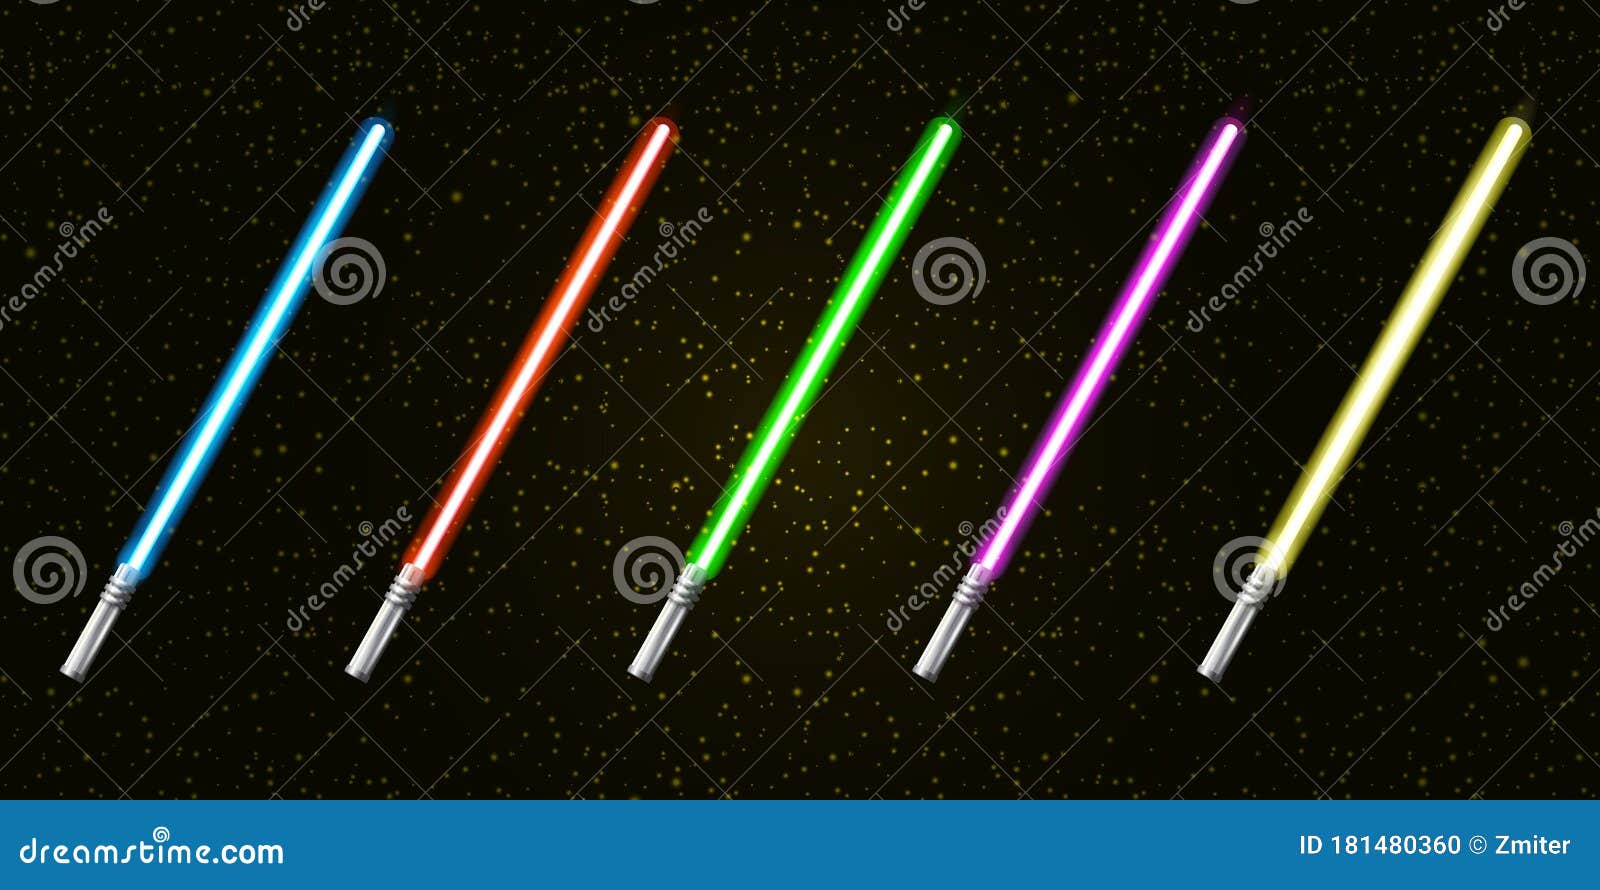 blue, red, green, pink and yellow laser sword lightsaber set  on starry black galaxy background. may the 4th be